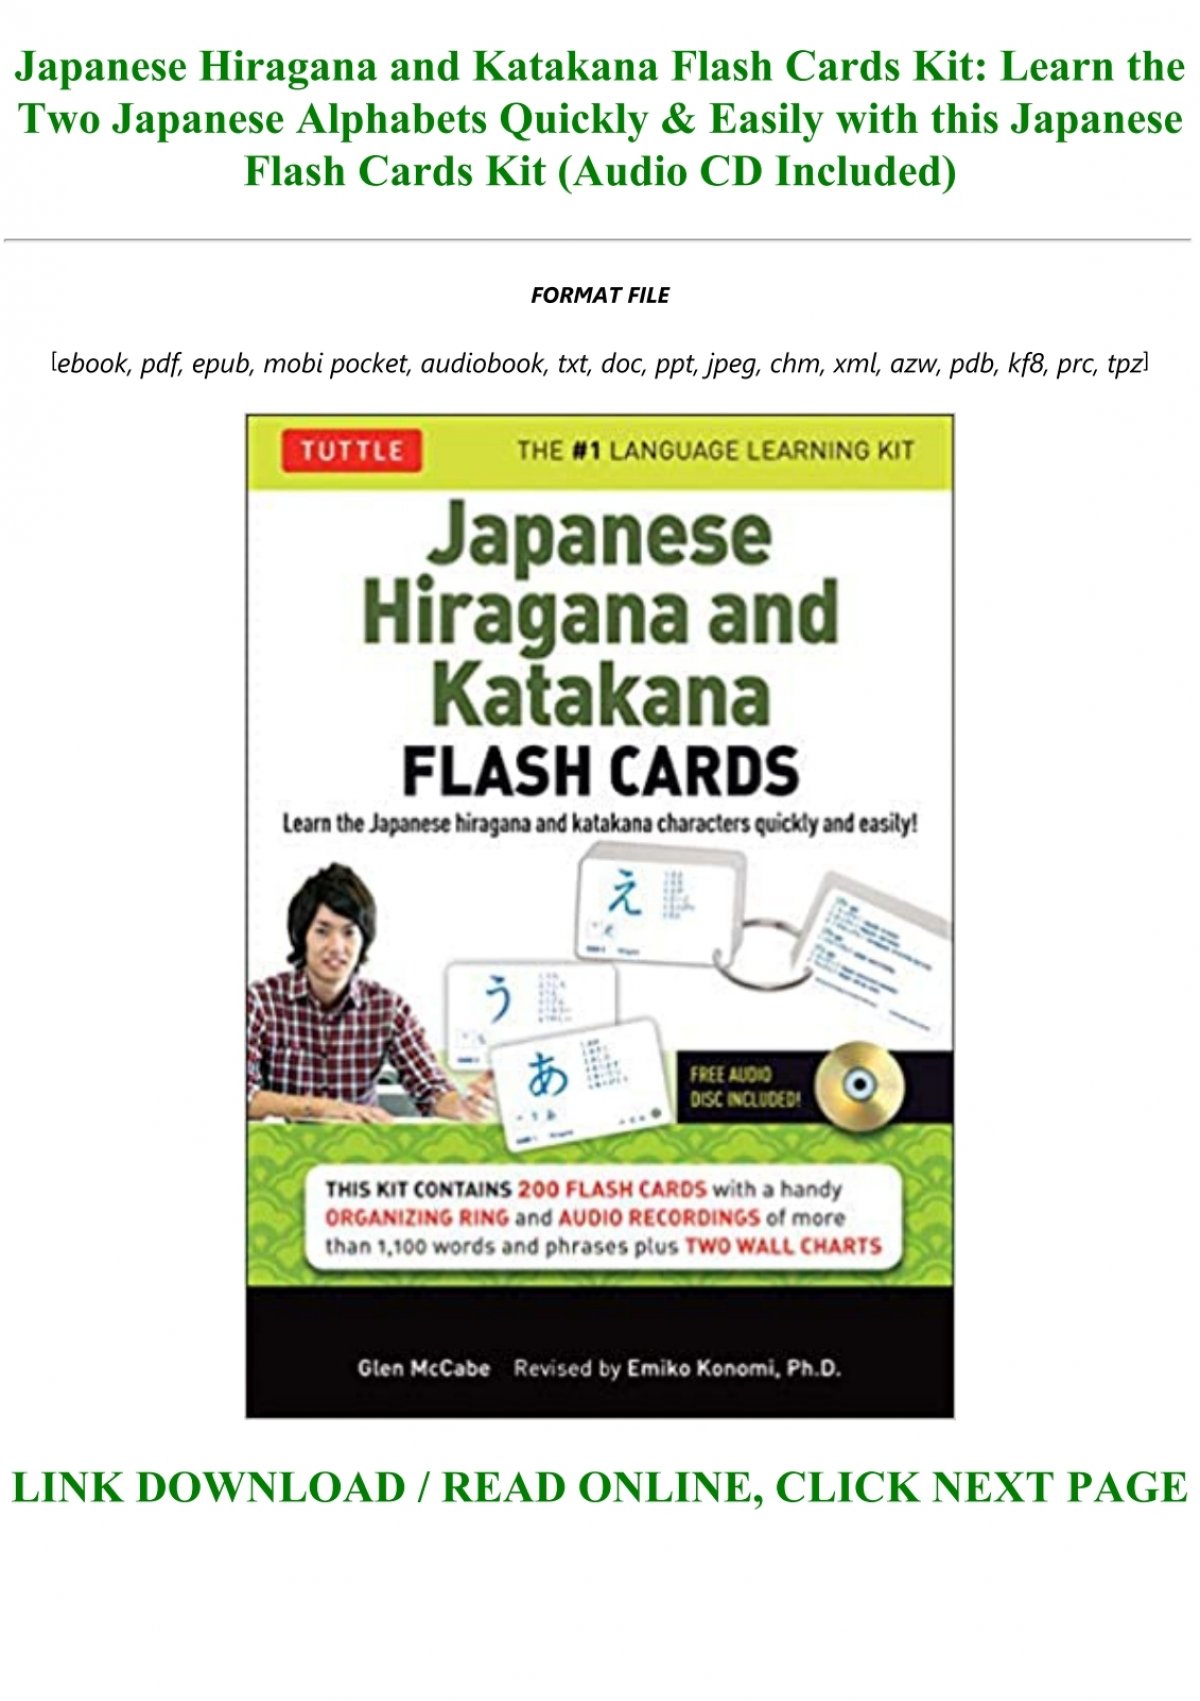 Read Book Japanese Hiragana And Katakana Flash Cards Kit Learn The Two Japanese Alphabets Quickly Easily With This Japanese Flash Cards Kit Audio Cd Included Full Pdf Online